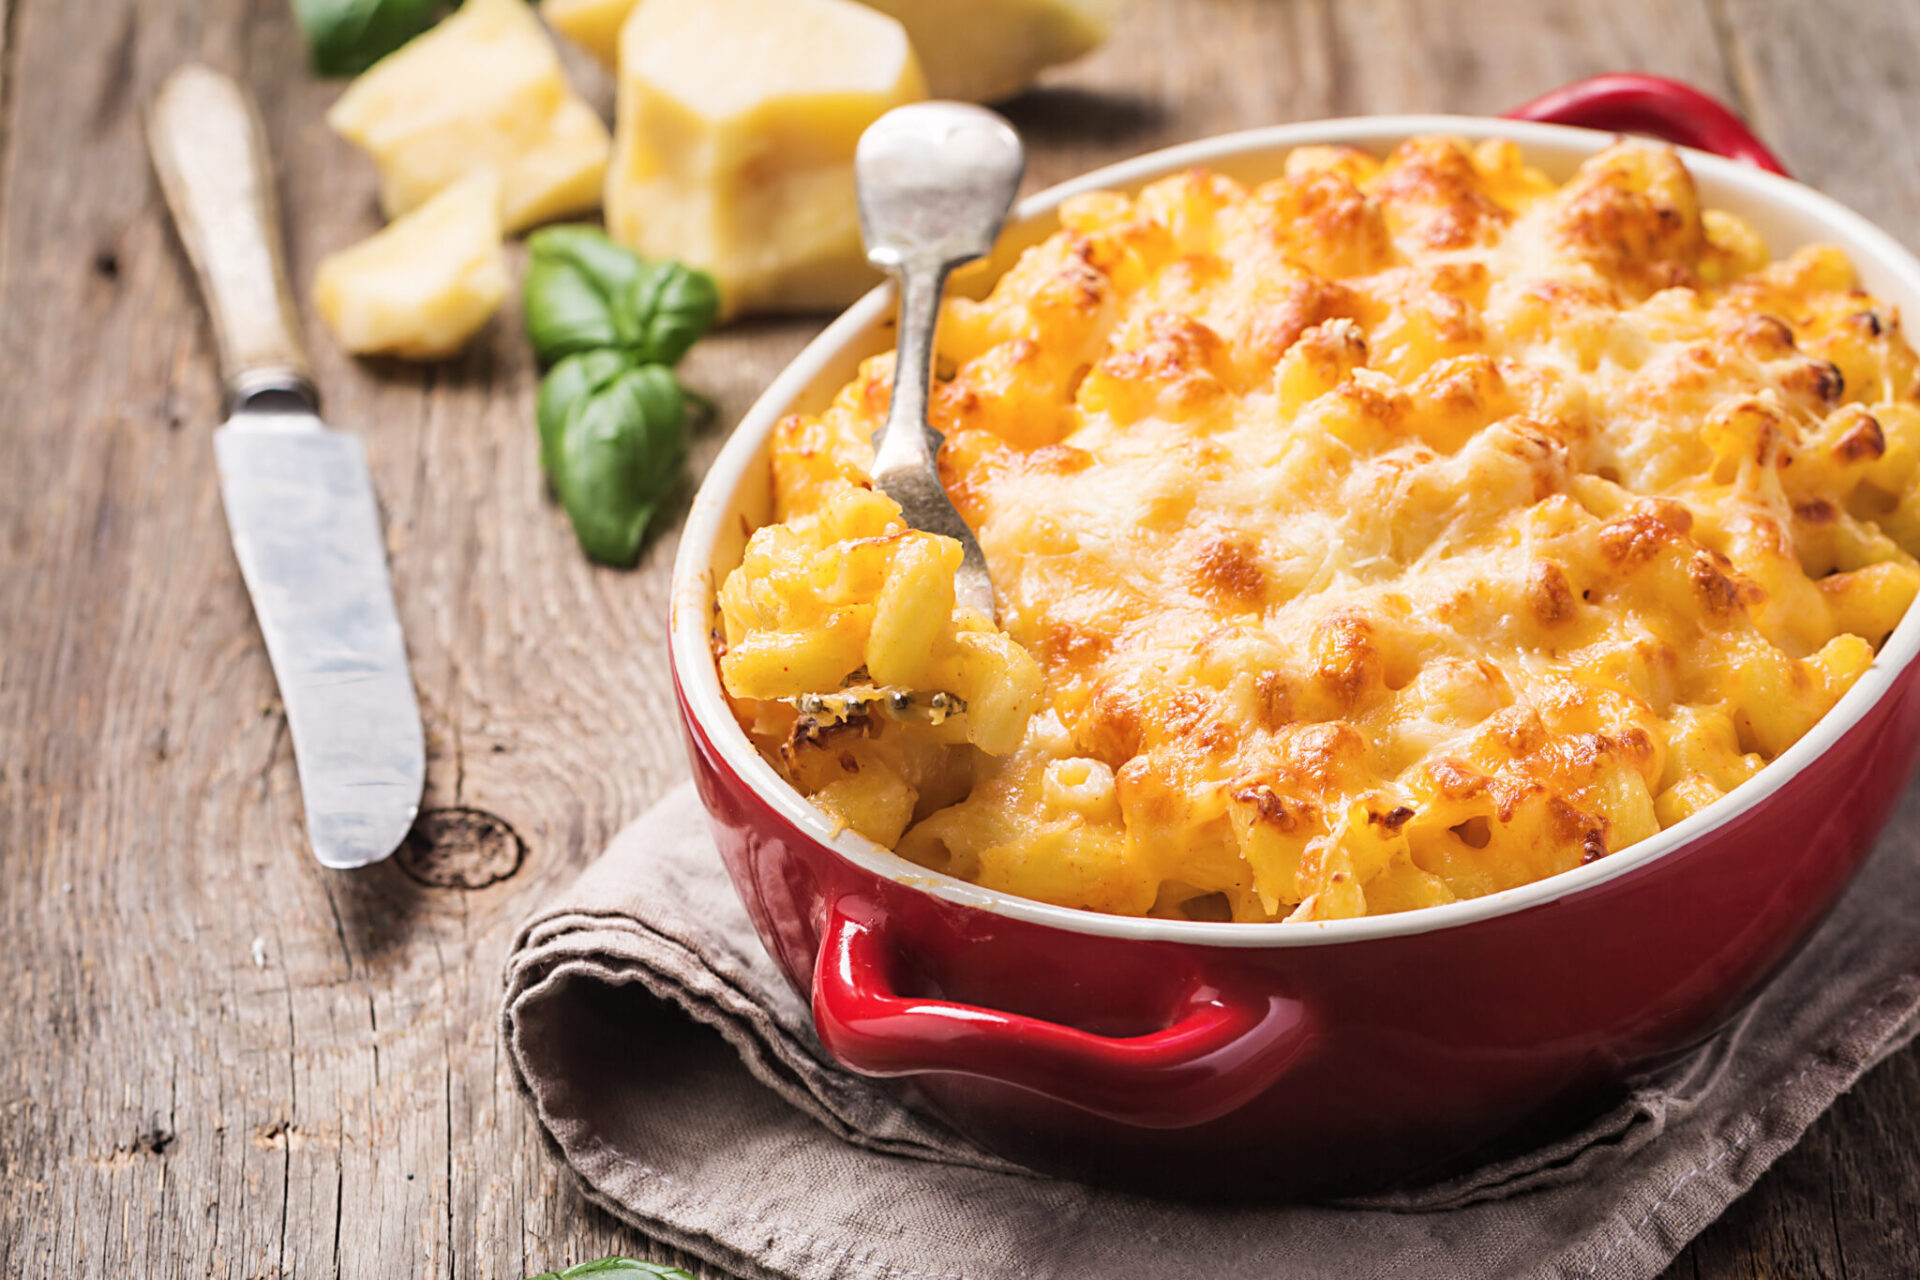 Nashville Hot Baked Mac & Cheese The Real Kitchen